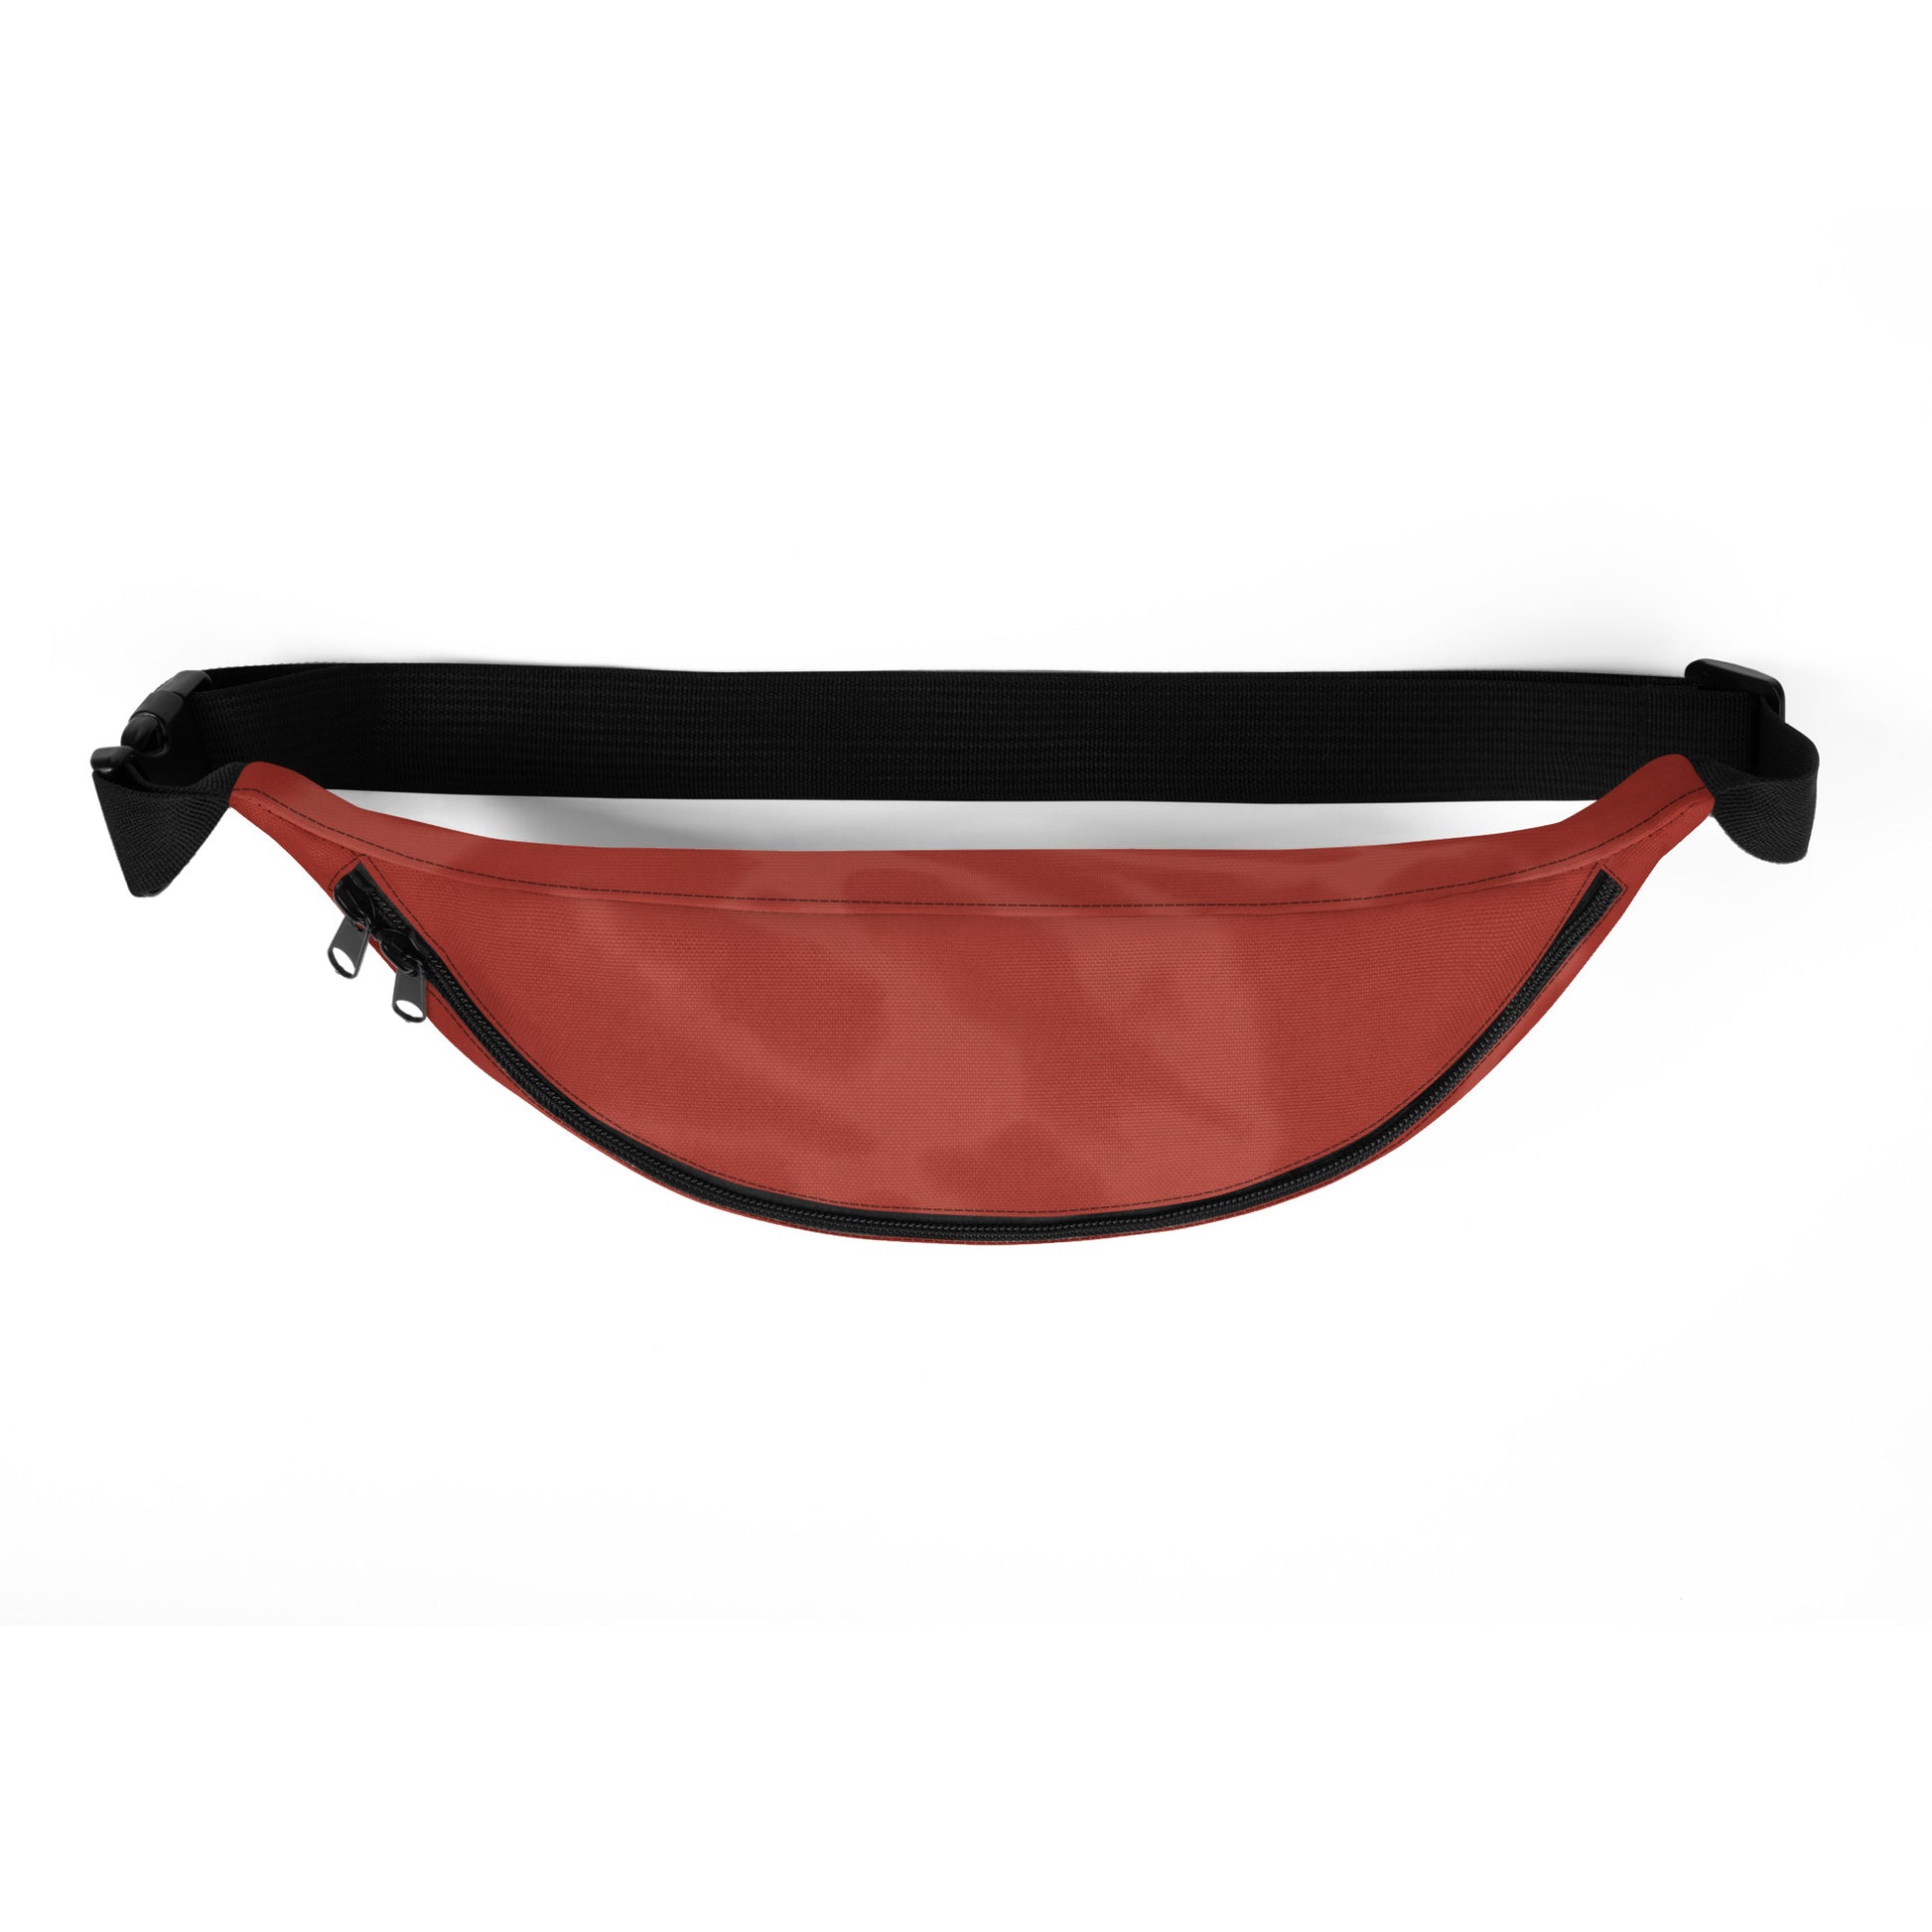 Travel Gift Fanny Pack - Red Tie-Dye • OGG Maui • YHM Designs - Image 08